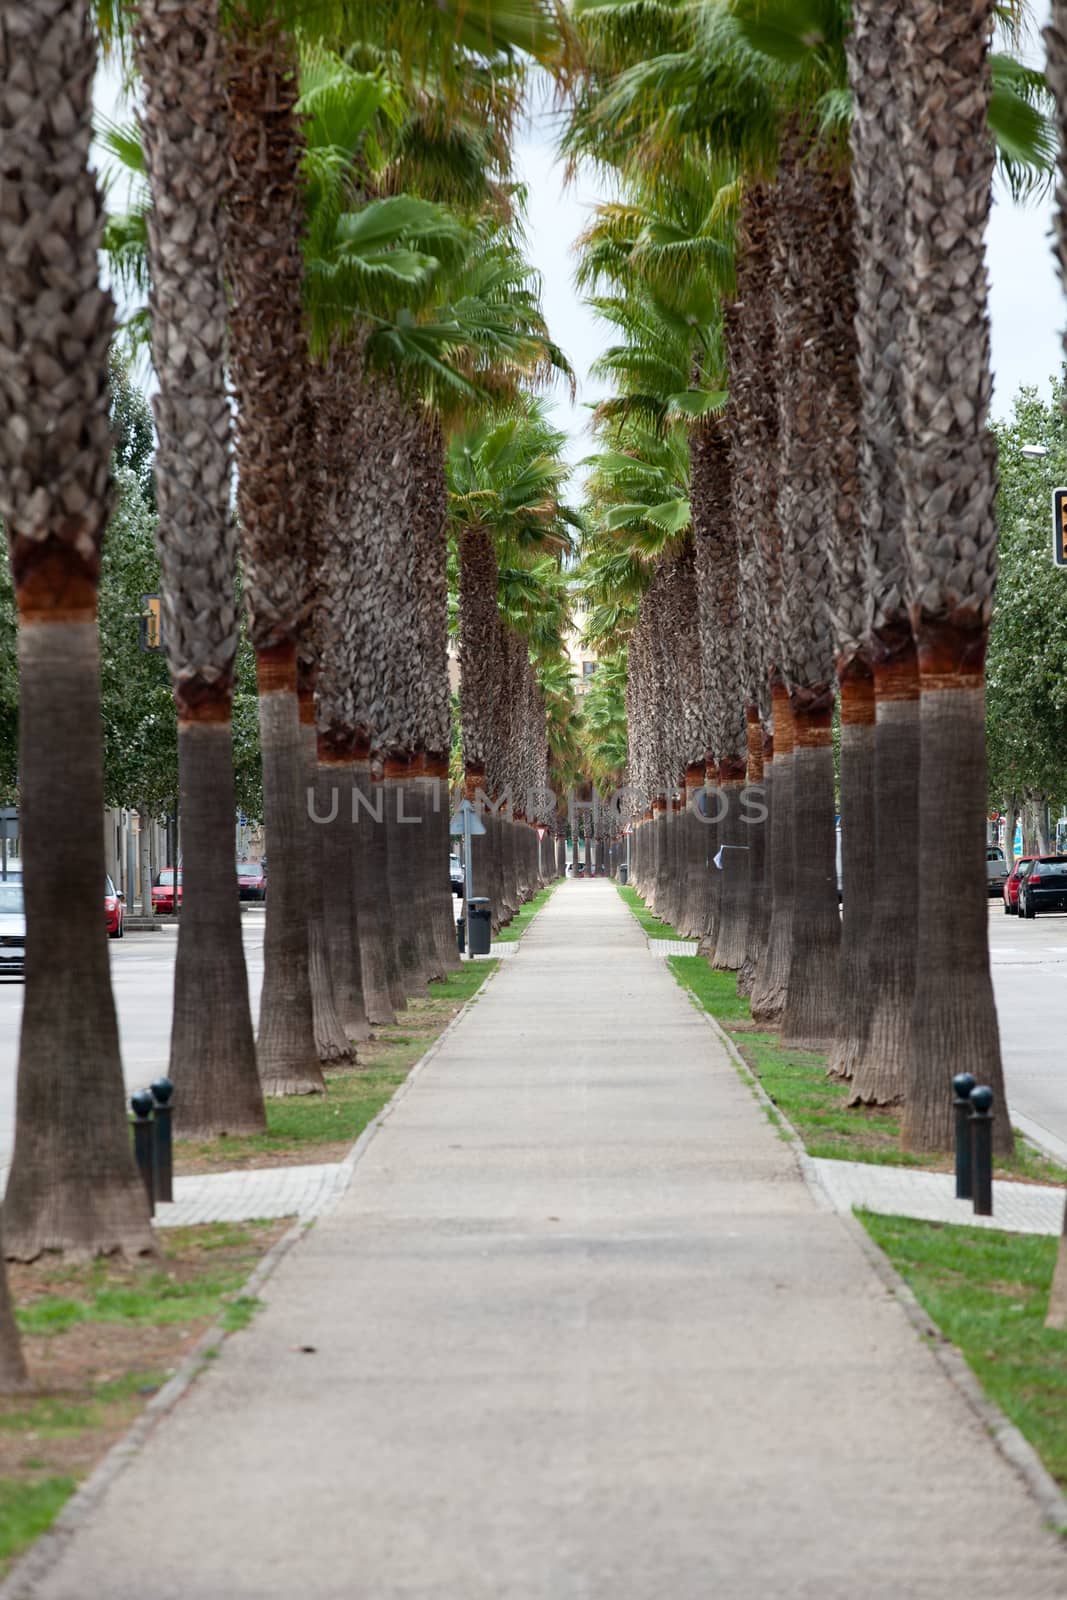 The neverending avenue with palms in Manacor. Majorca, Spain